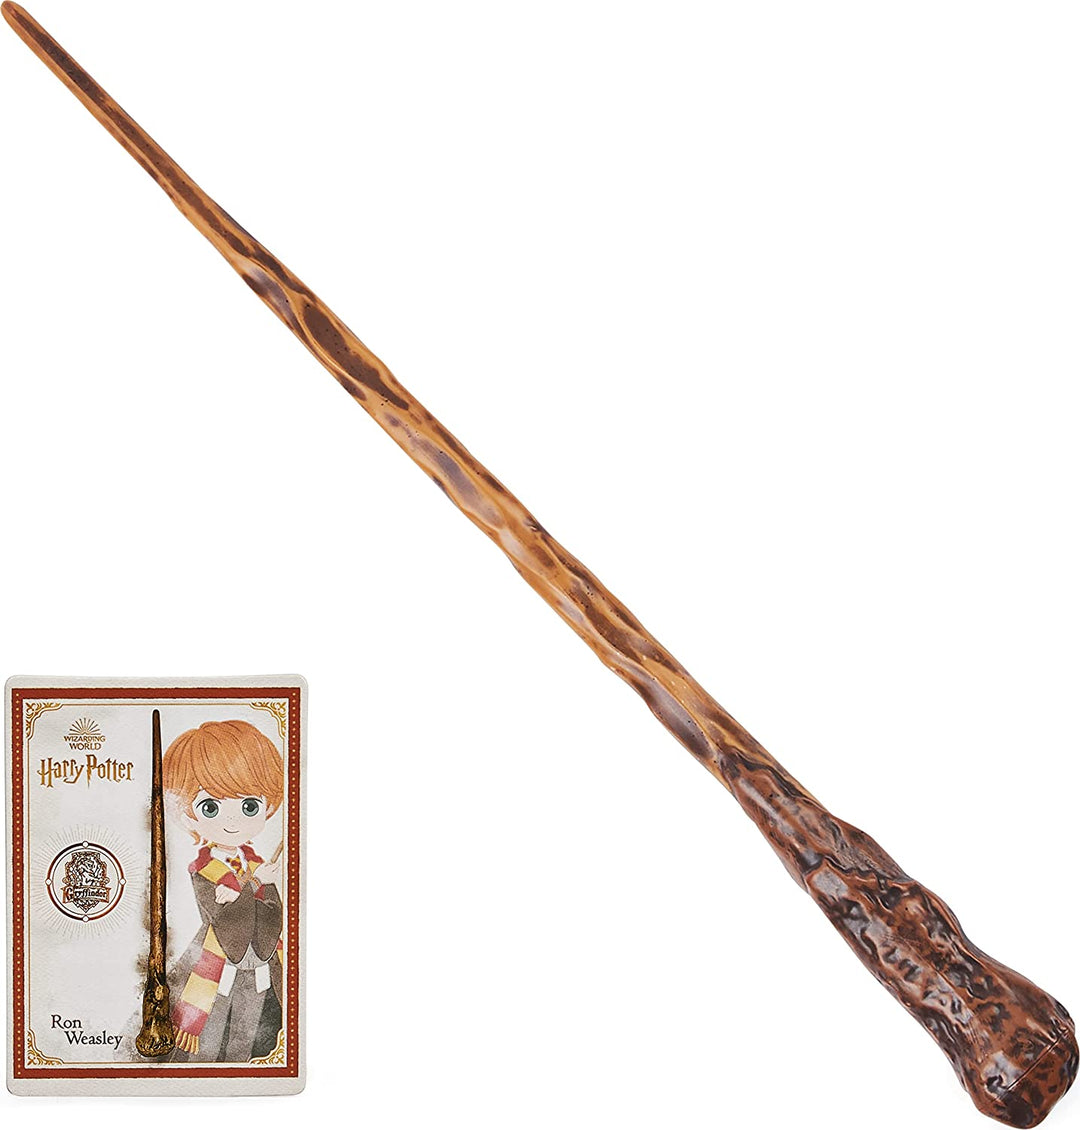 Wizarding World, Authentic 12-inch Spellbinding Ron Weasley Wand with Collectibl